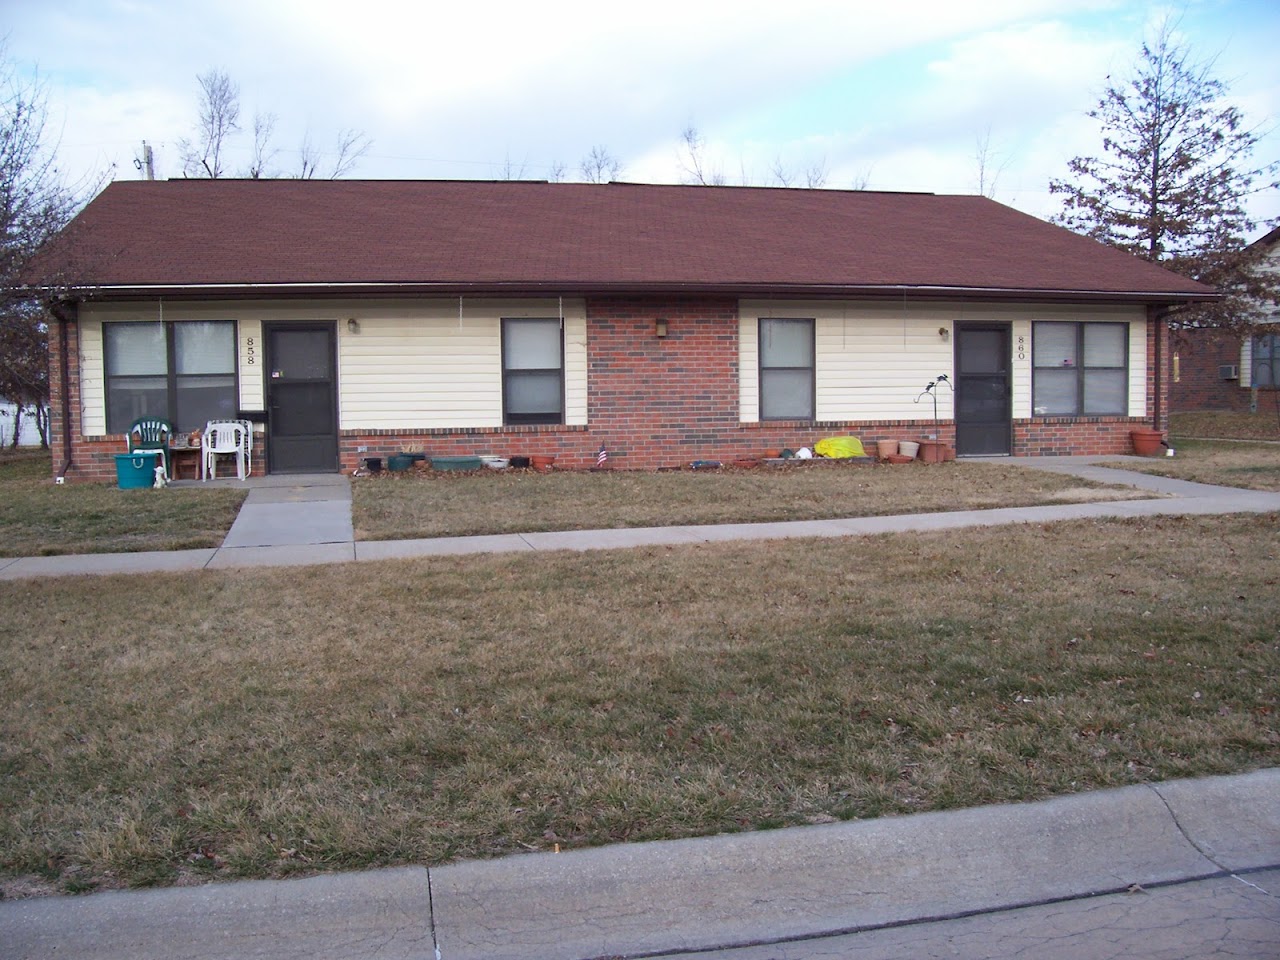 Photo of HARRISONVILLE PROPERTIES II. Affordable housing located at 804 LOCUST ST HARRISONVILLE, MO 64701